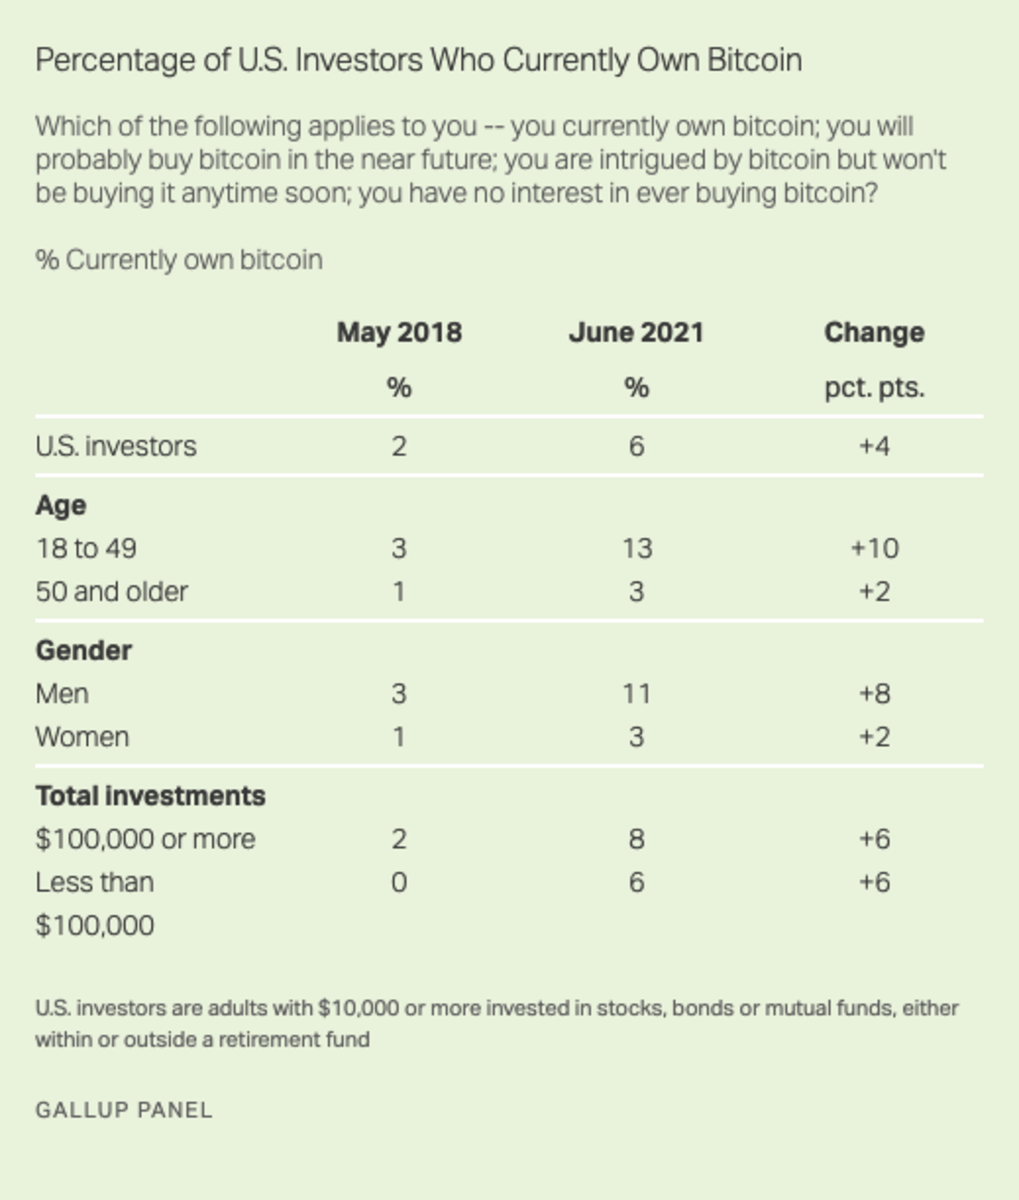 Percentage of U.S. investors who currently own bitcoin, compared to 2018. Source: Gallup